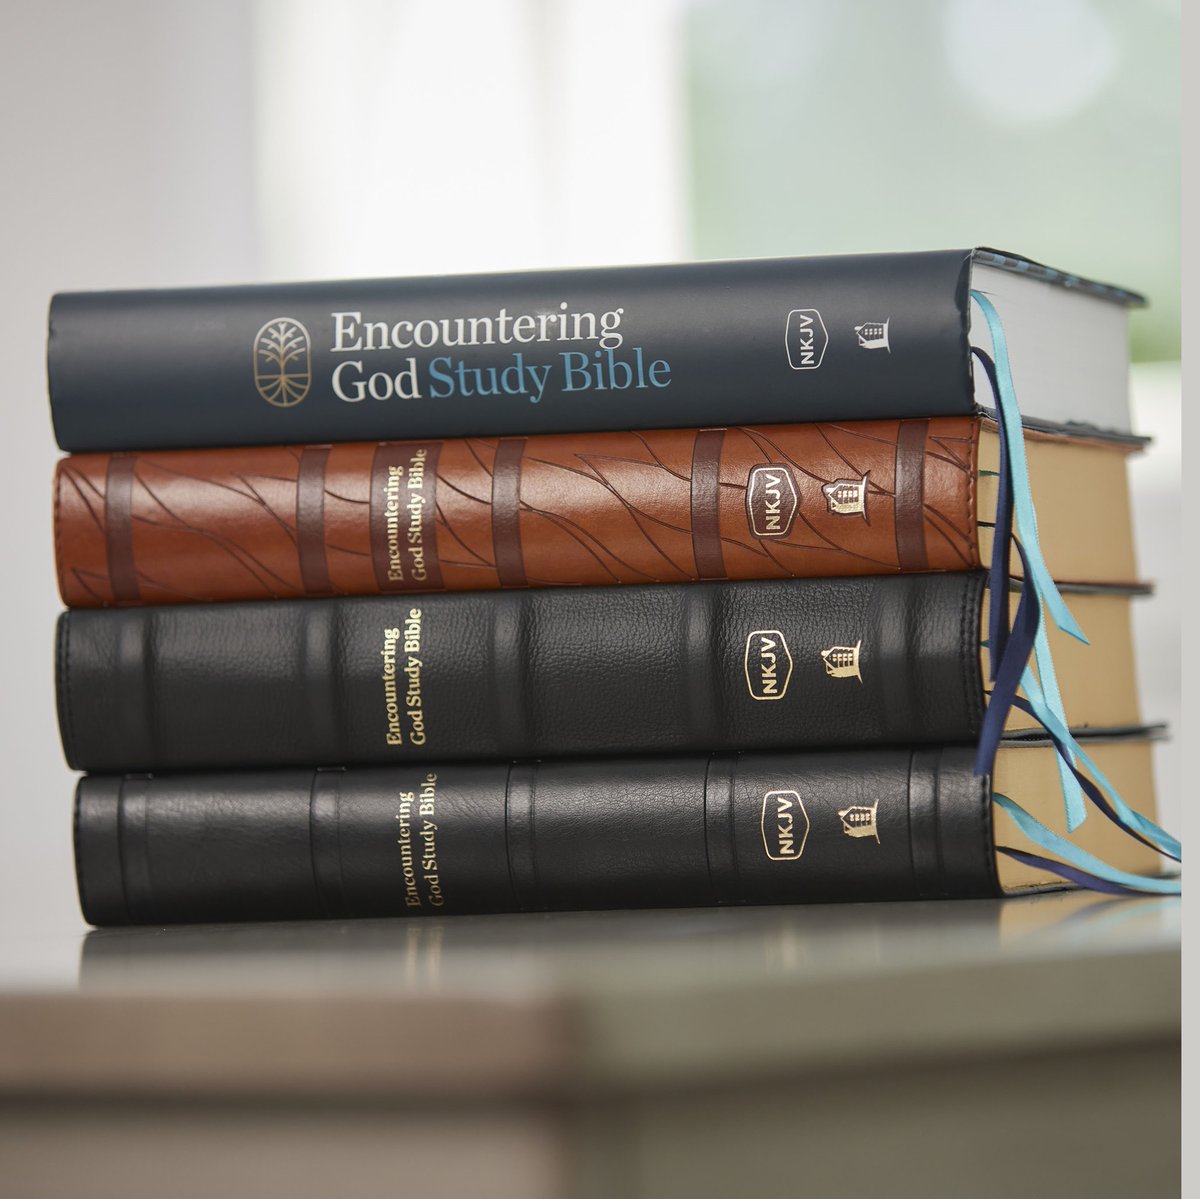 The  Encountering God Study Bible is the latest release from Blackaby  Ministries. Read my review & Enter to Win a copy!  #EncounteringGodStudyBibleMIN #EncounteringGodBible  #MomentumInfluencerNetwork
@blackabyministries @nelsonbibles @richardblackaby
cindynavarro.blogspot.com/2024/05/the-en…